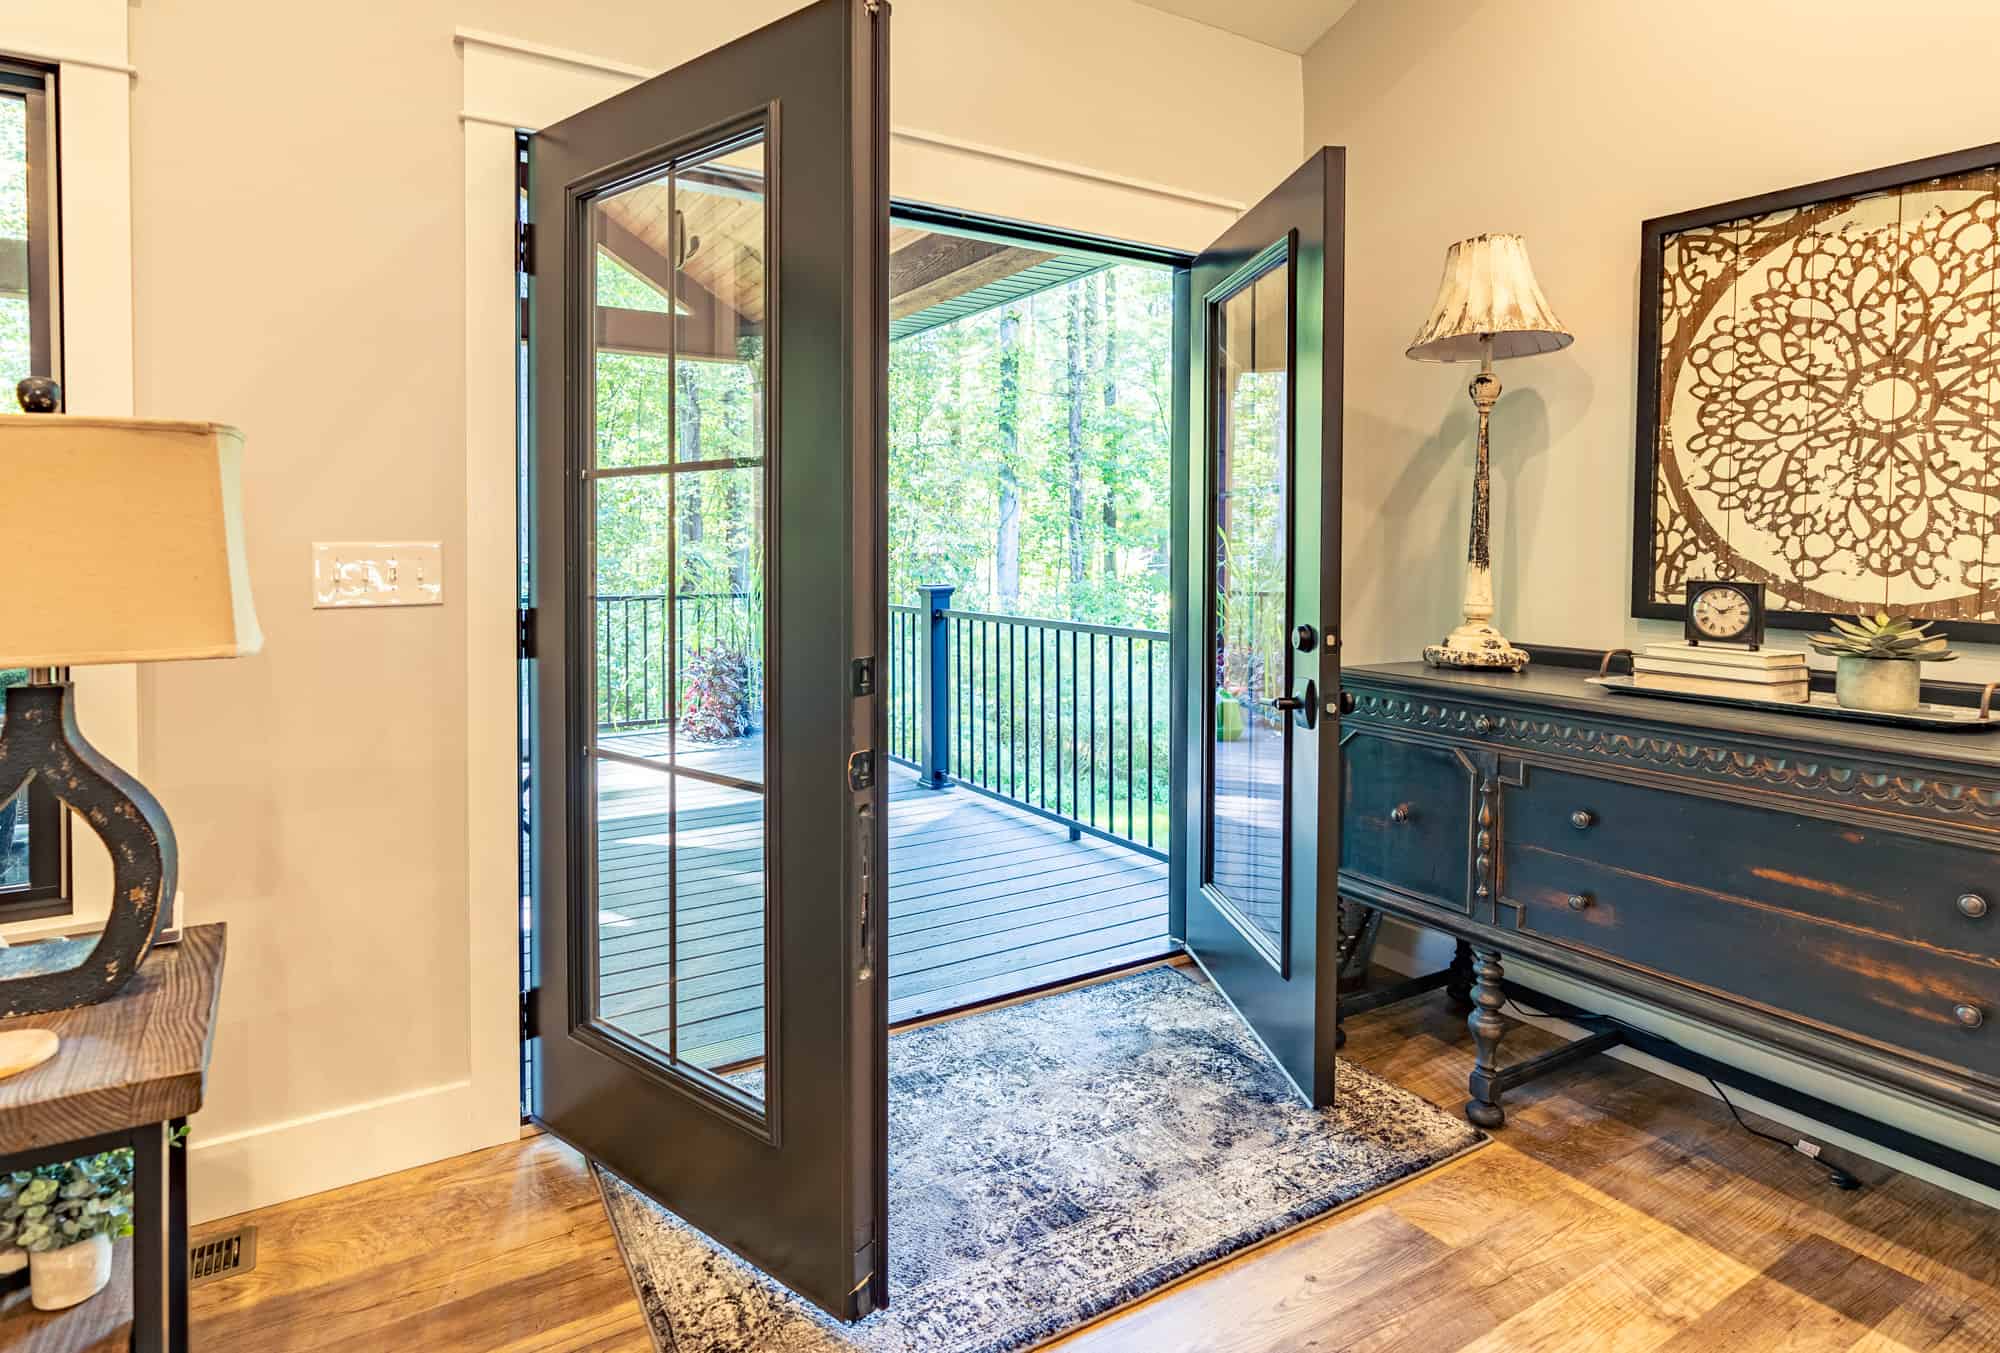 Showing Legacy™ 460 Steel French Doors In Rustic Bronze With Internal Grids for your next remodeling project